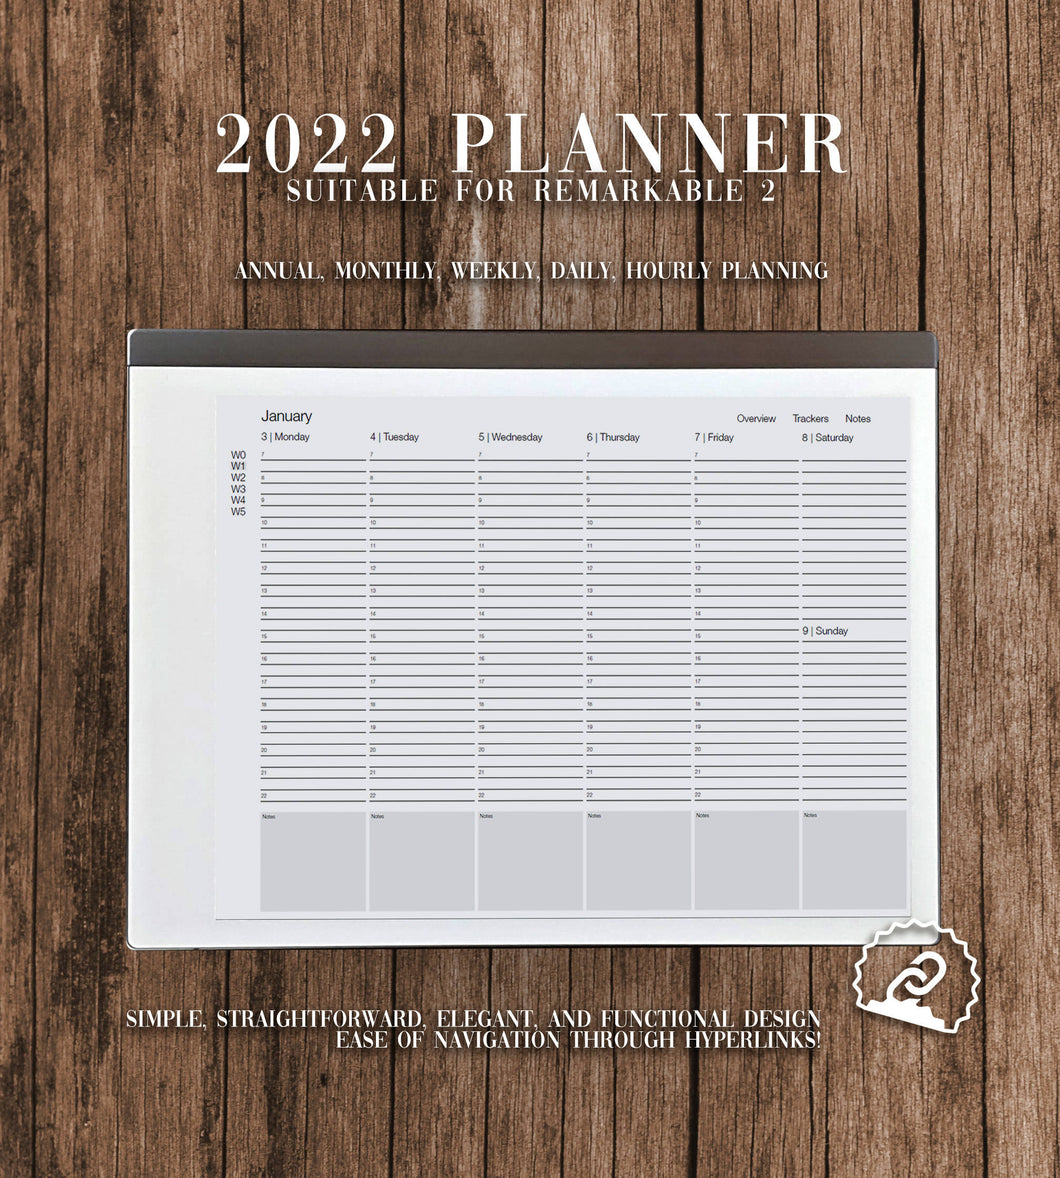 2022 Planner for reMarkable 2 | Hyperlinked PDF file | Annual, monthly, weekly (daily and hourly breakdown) view in landscape format